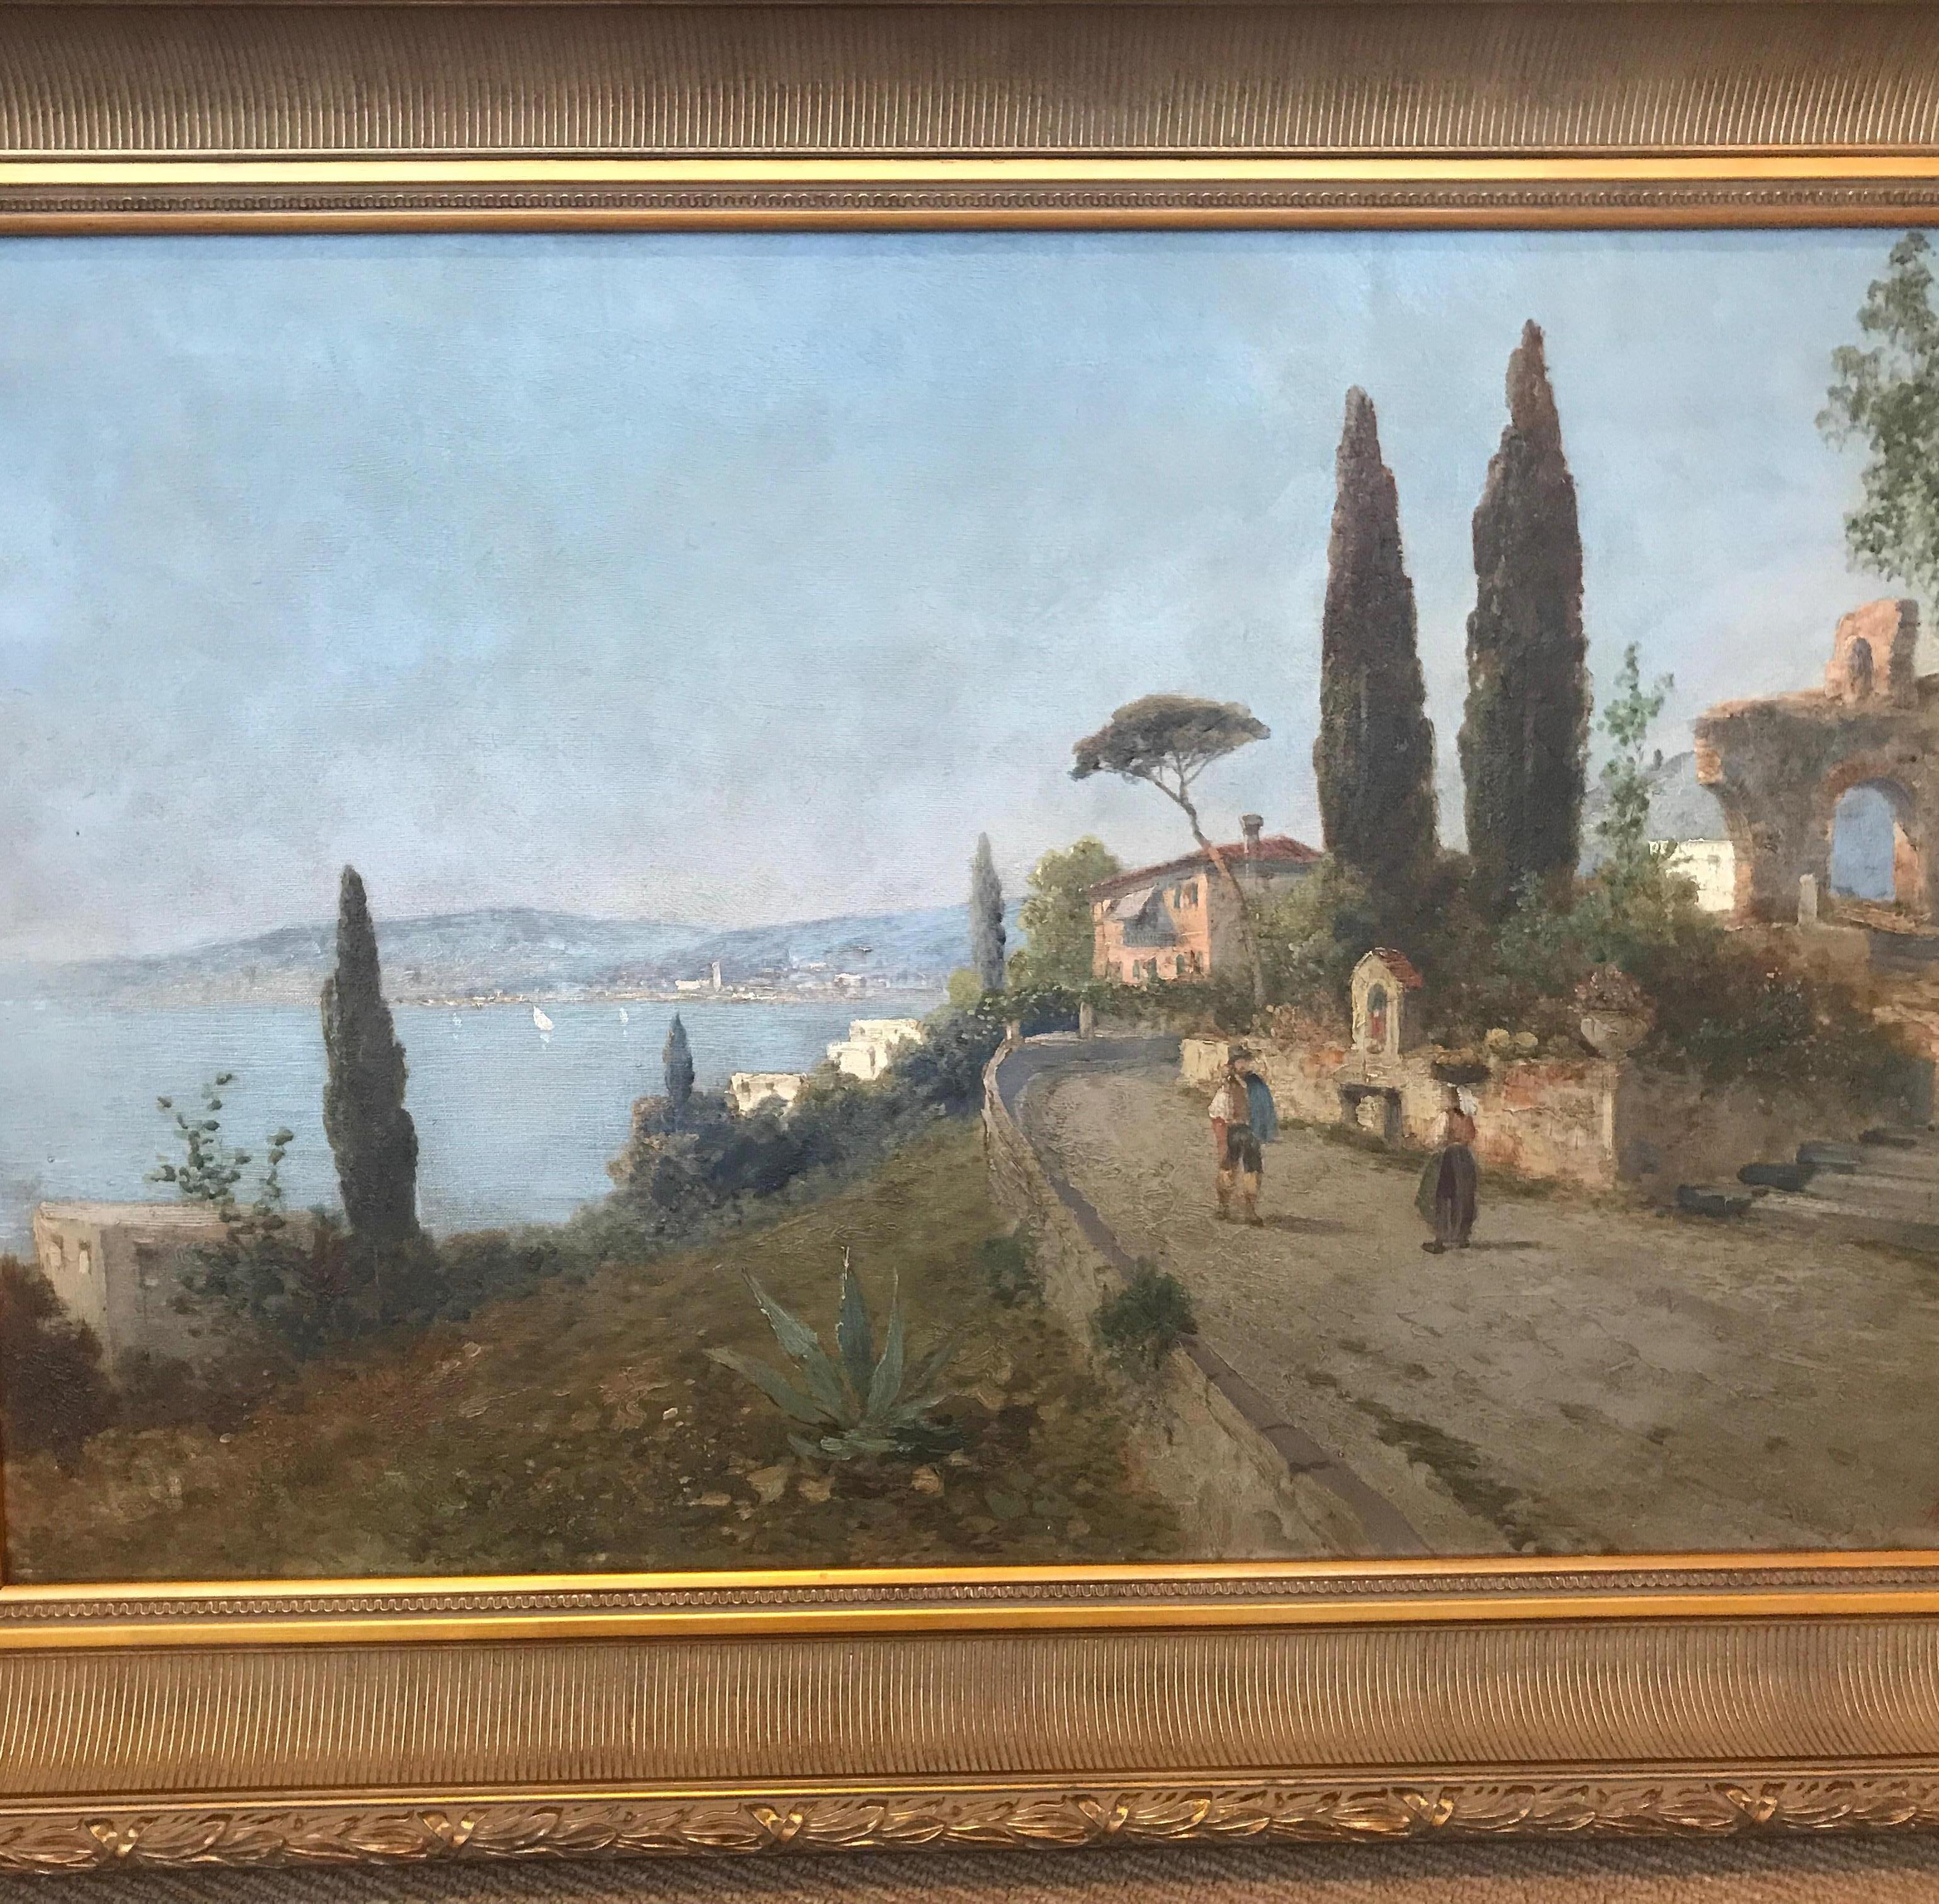 Exceptional 19th century oil on canvas painting of a harbor scene by listed artist George Fischhof (1859-1914), Austria. A romantic painting with a harbor, with villagers and homes set against a blue sky. Artist-signed in red with his pseudonym A.L.